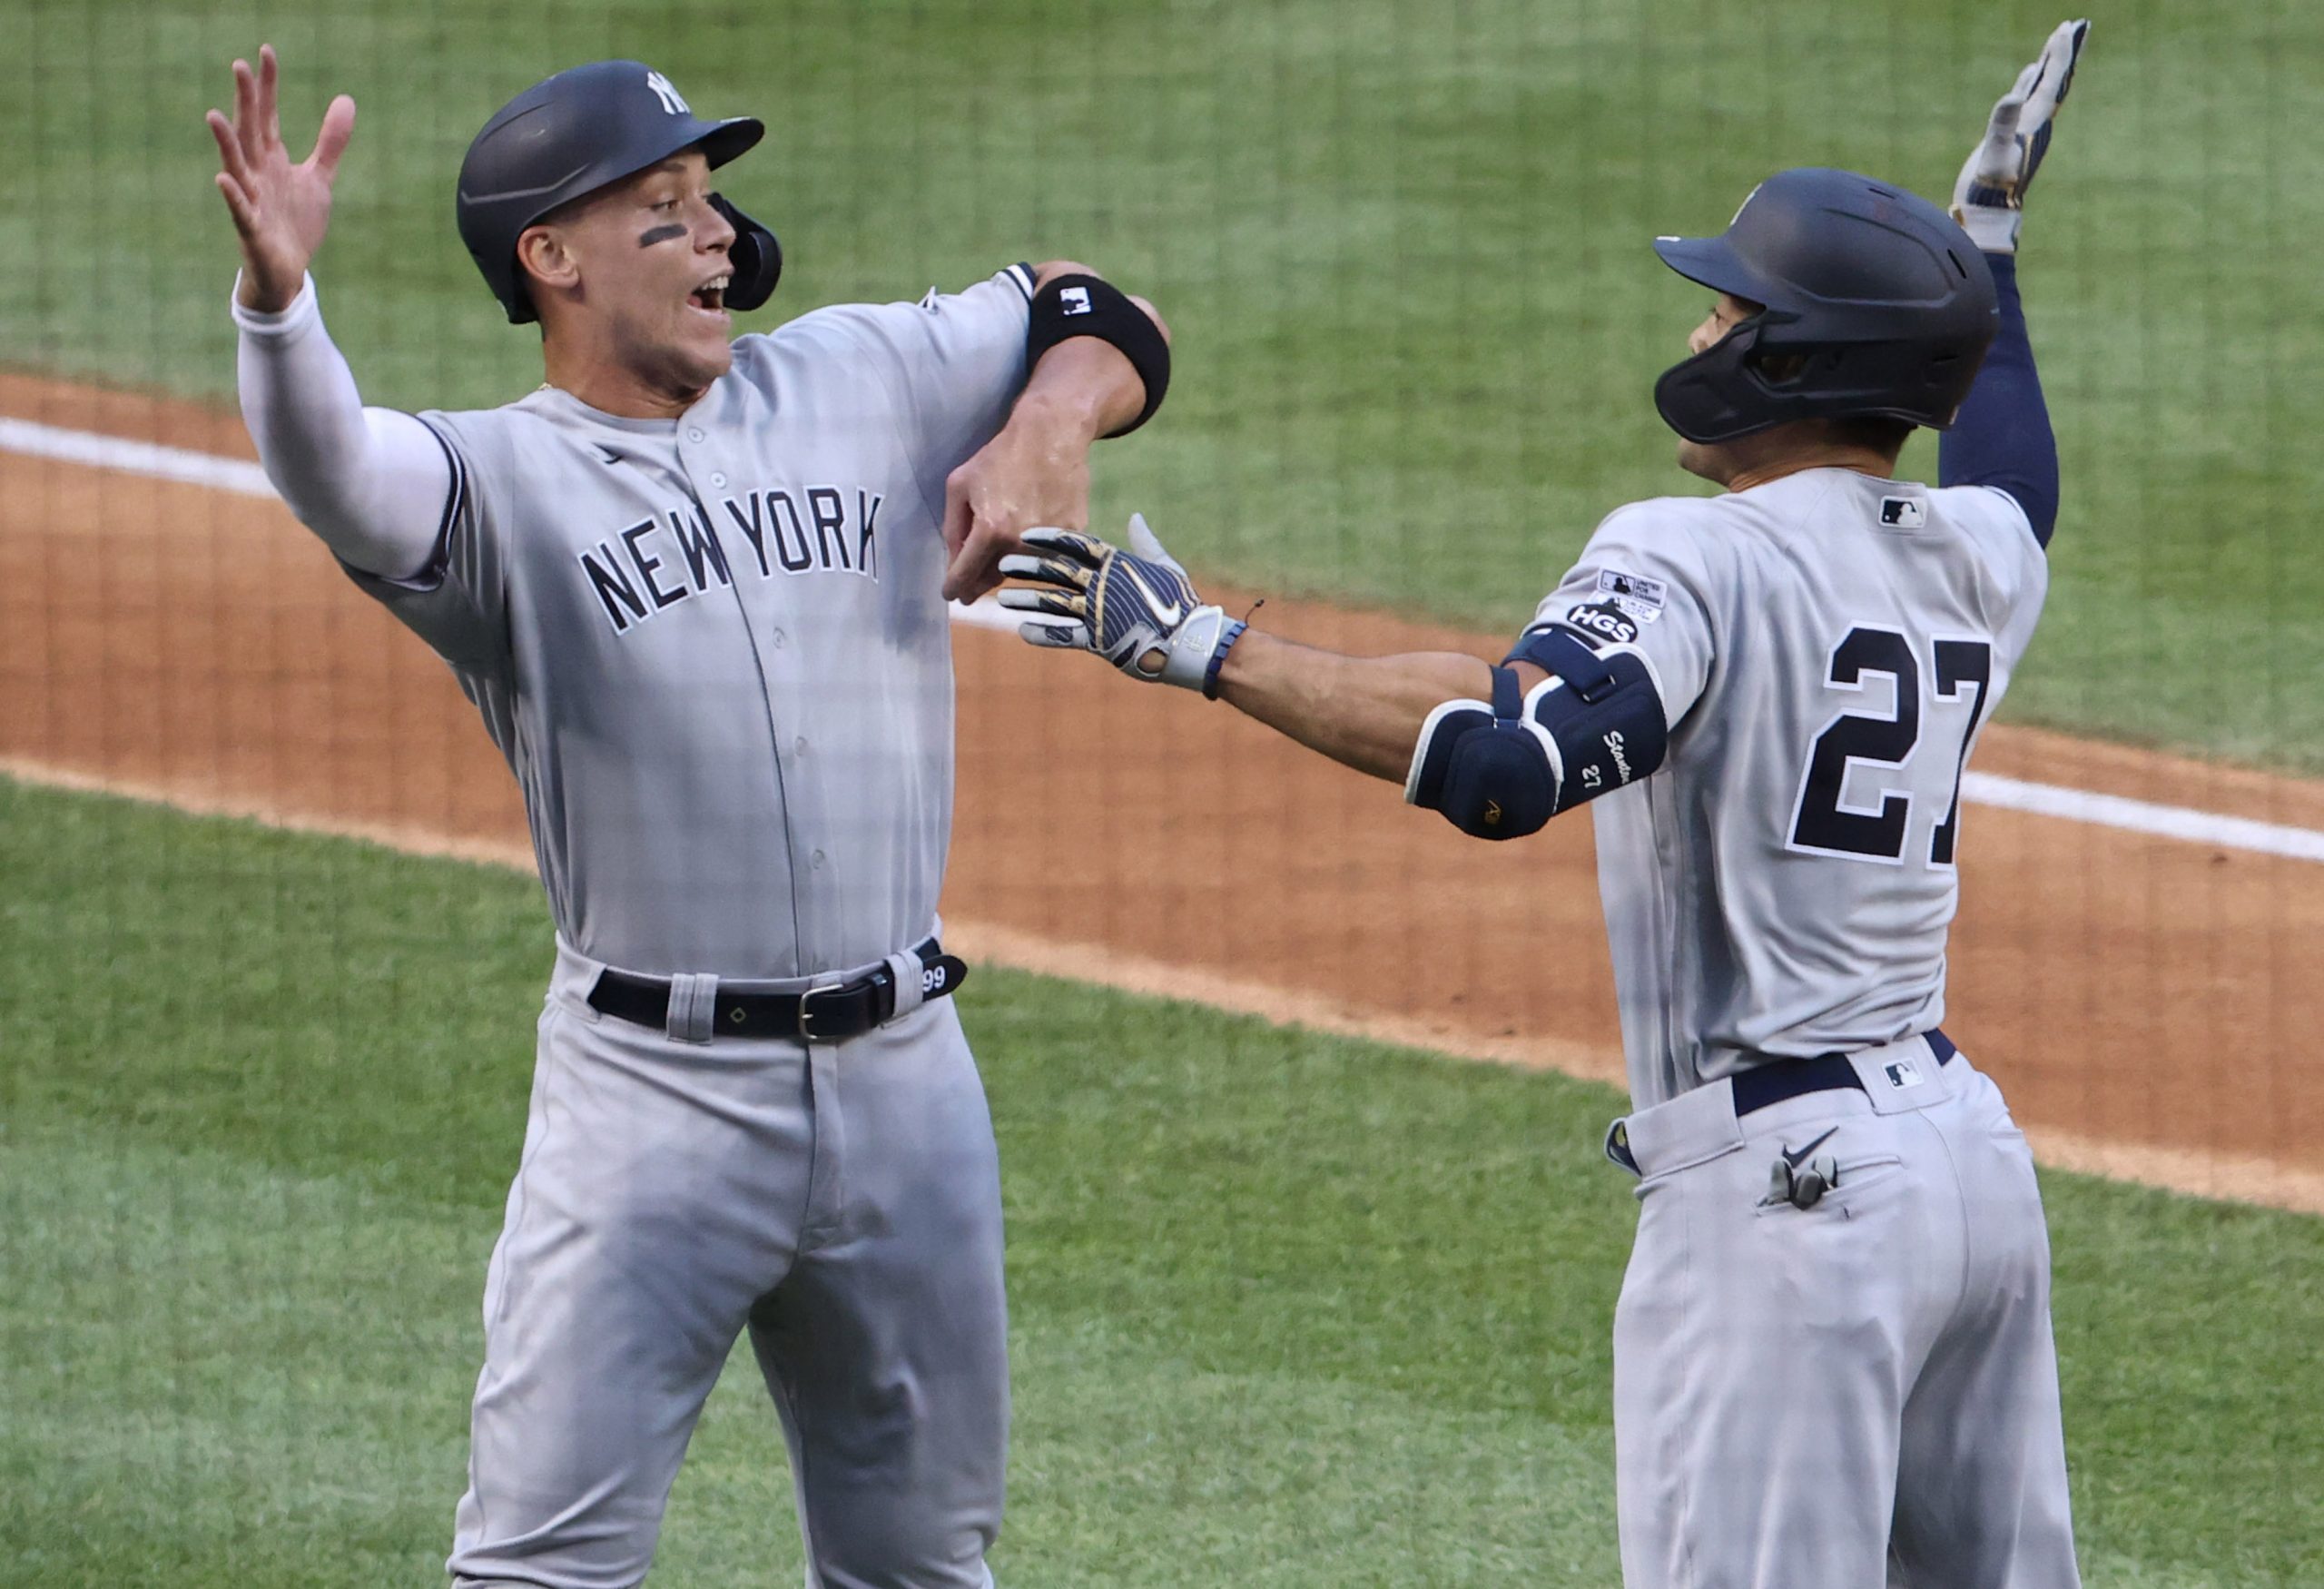 Aaron Judge and Giancarlo Stanton together in lineup makes Yankees nearly  unbeatable in postseason